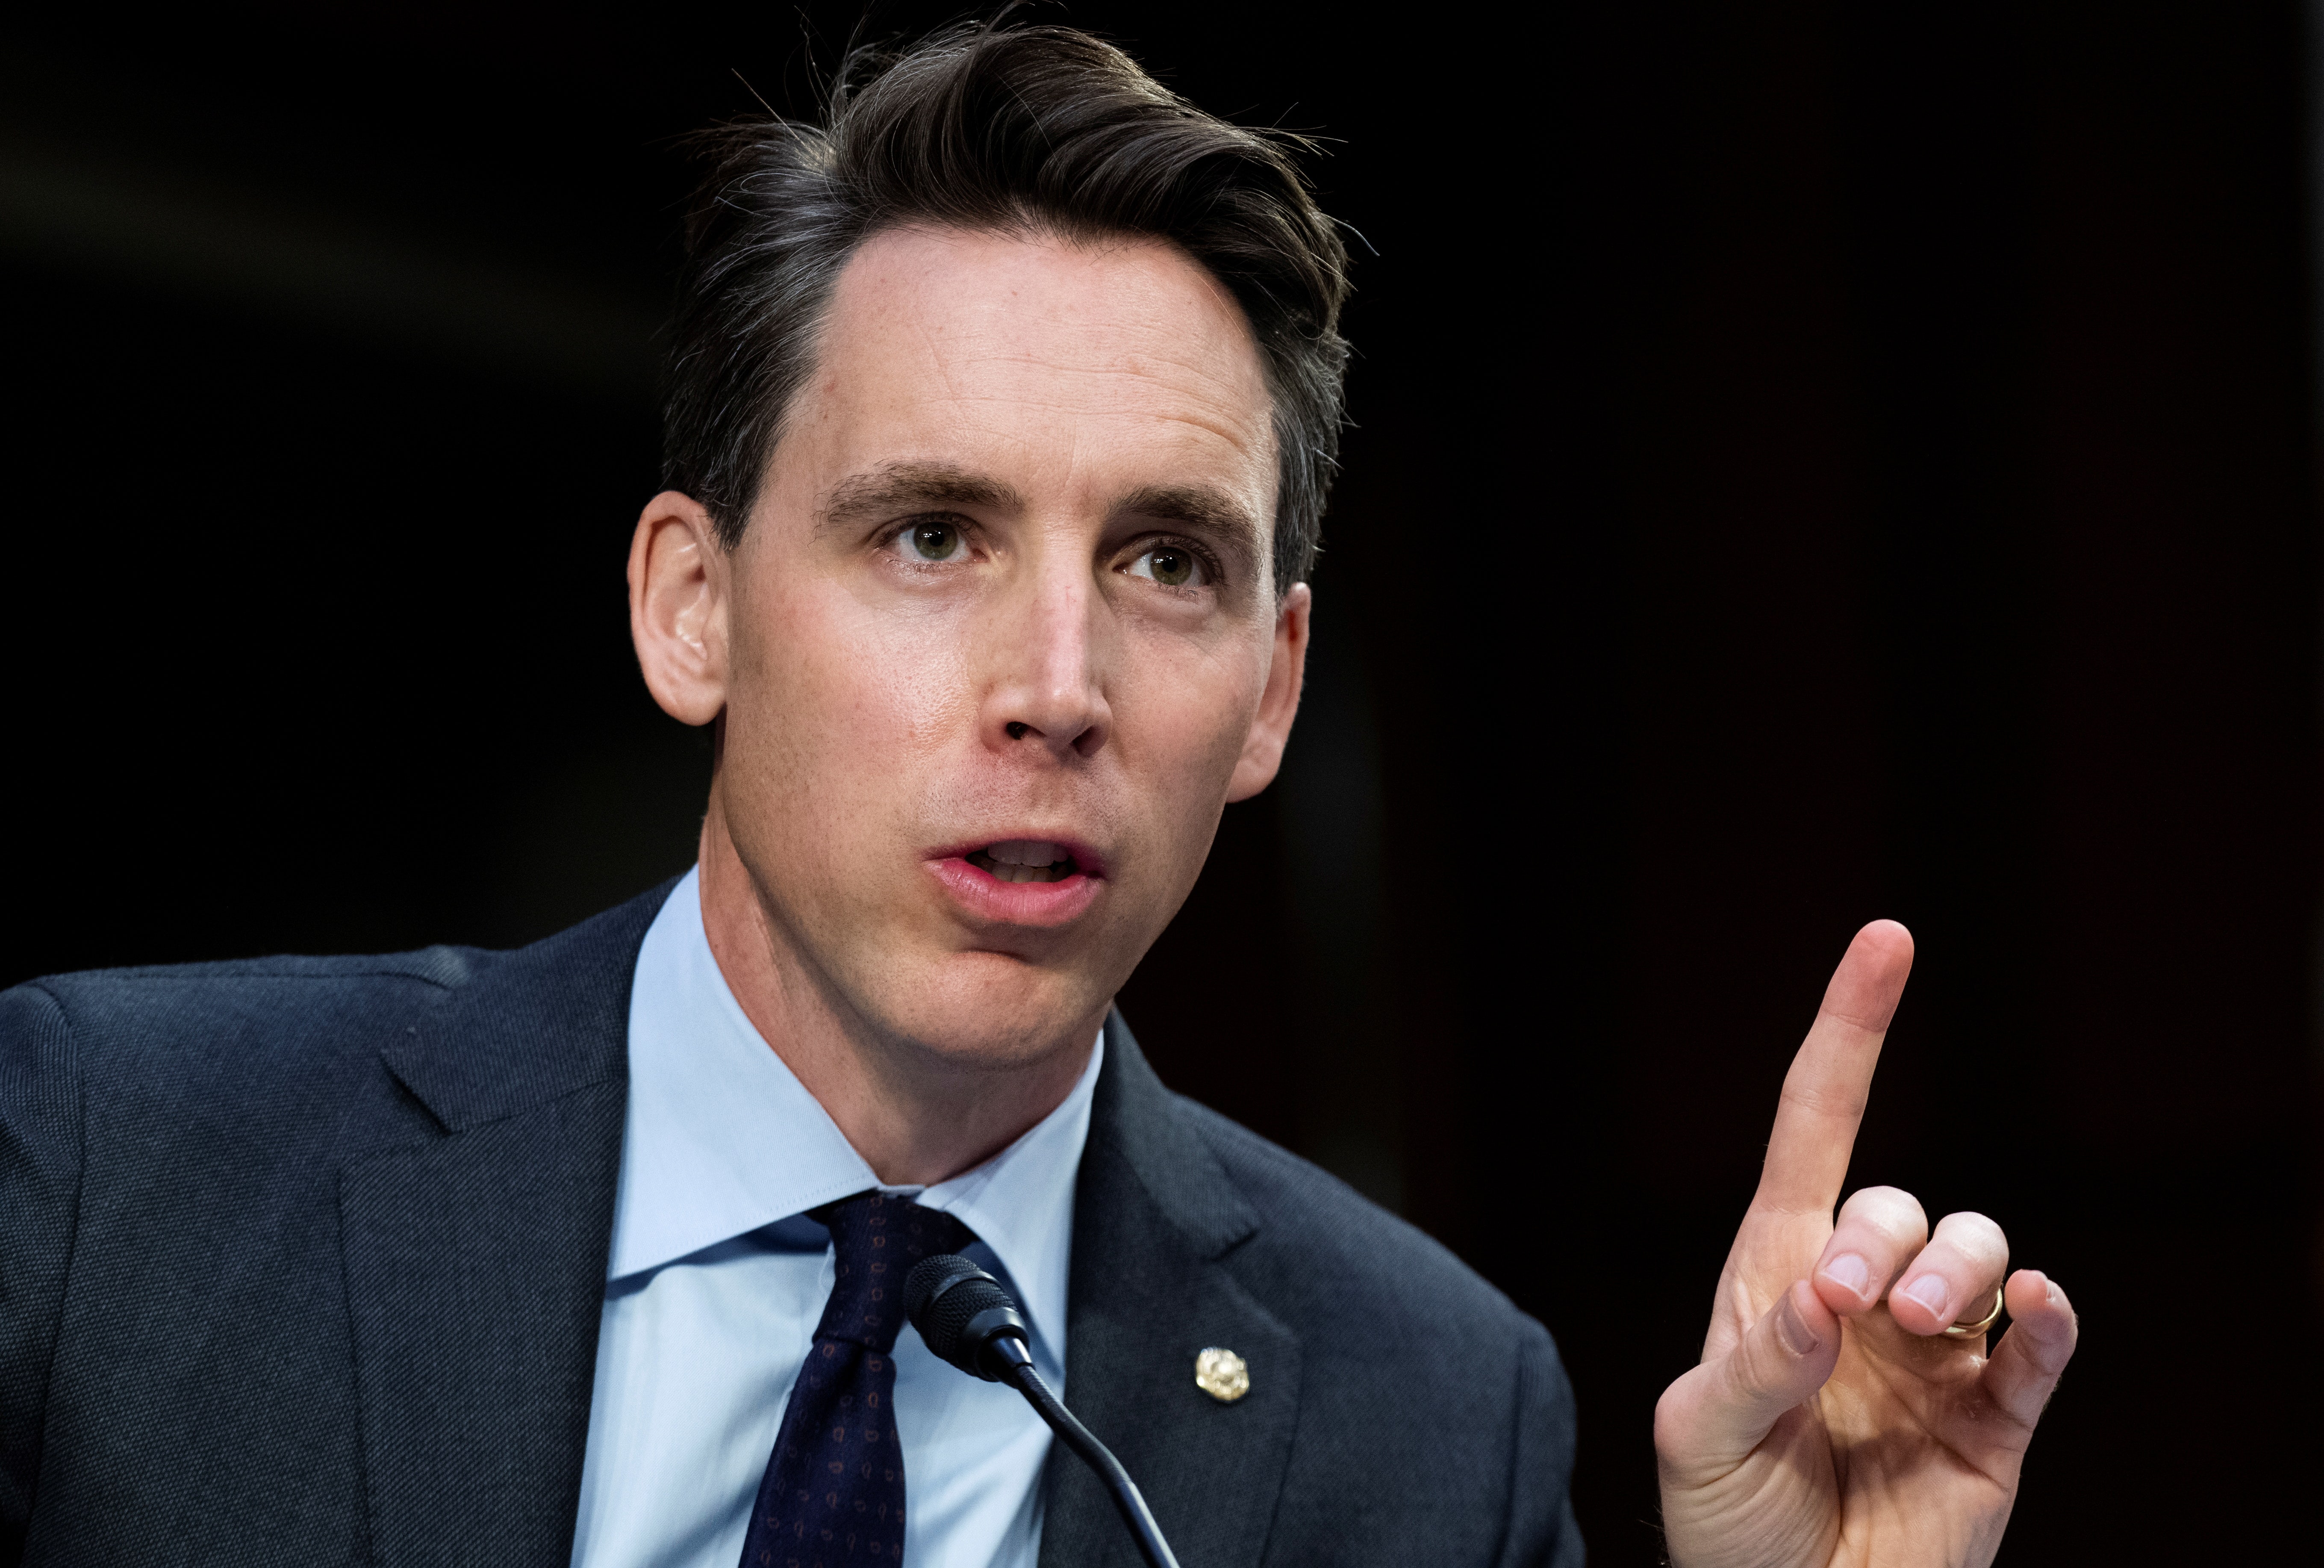 Hawley tears into media's goal as 'gatekeepers' of free speech: They'll regret their 'bargain' with Big Tech